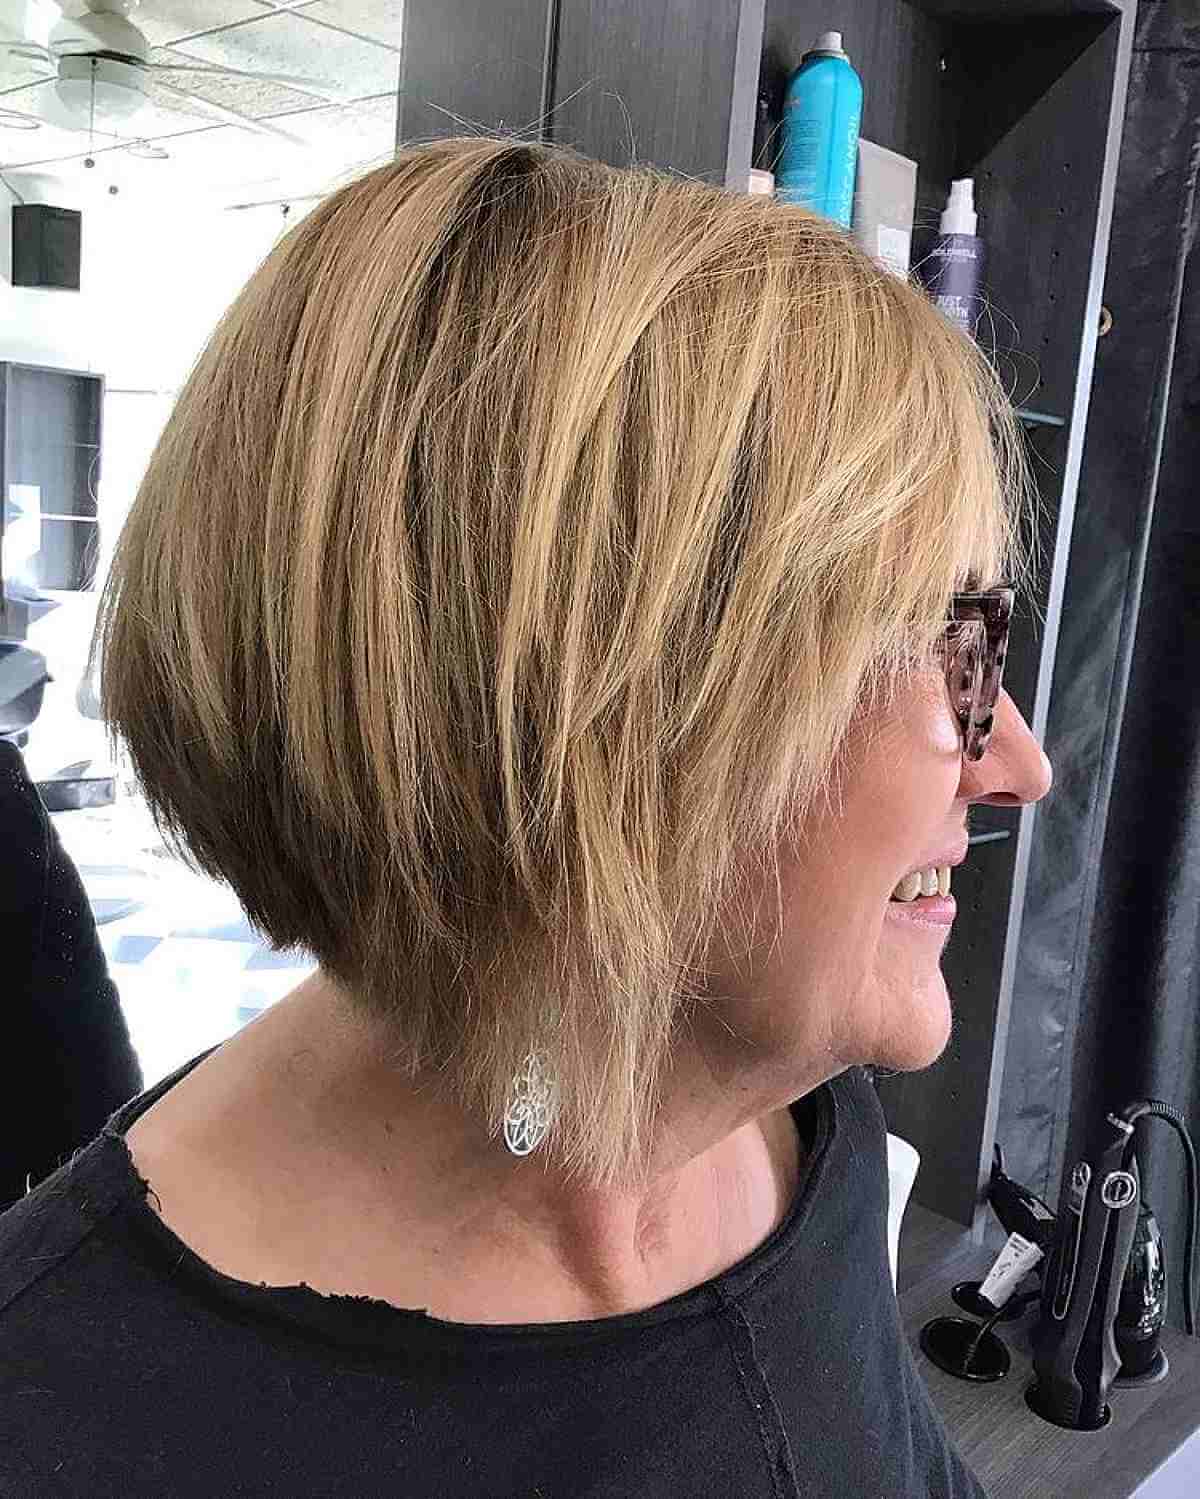 Wispy, Shaggy and Textured Inverted Bob